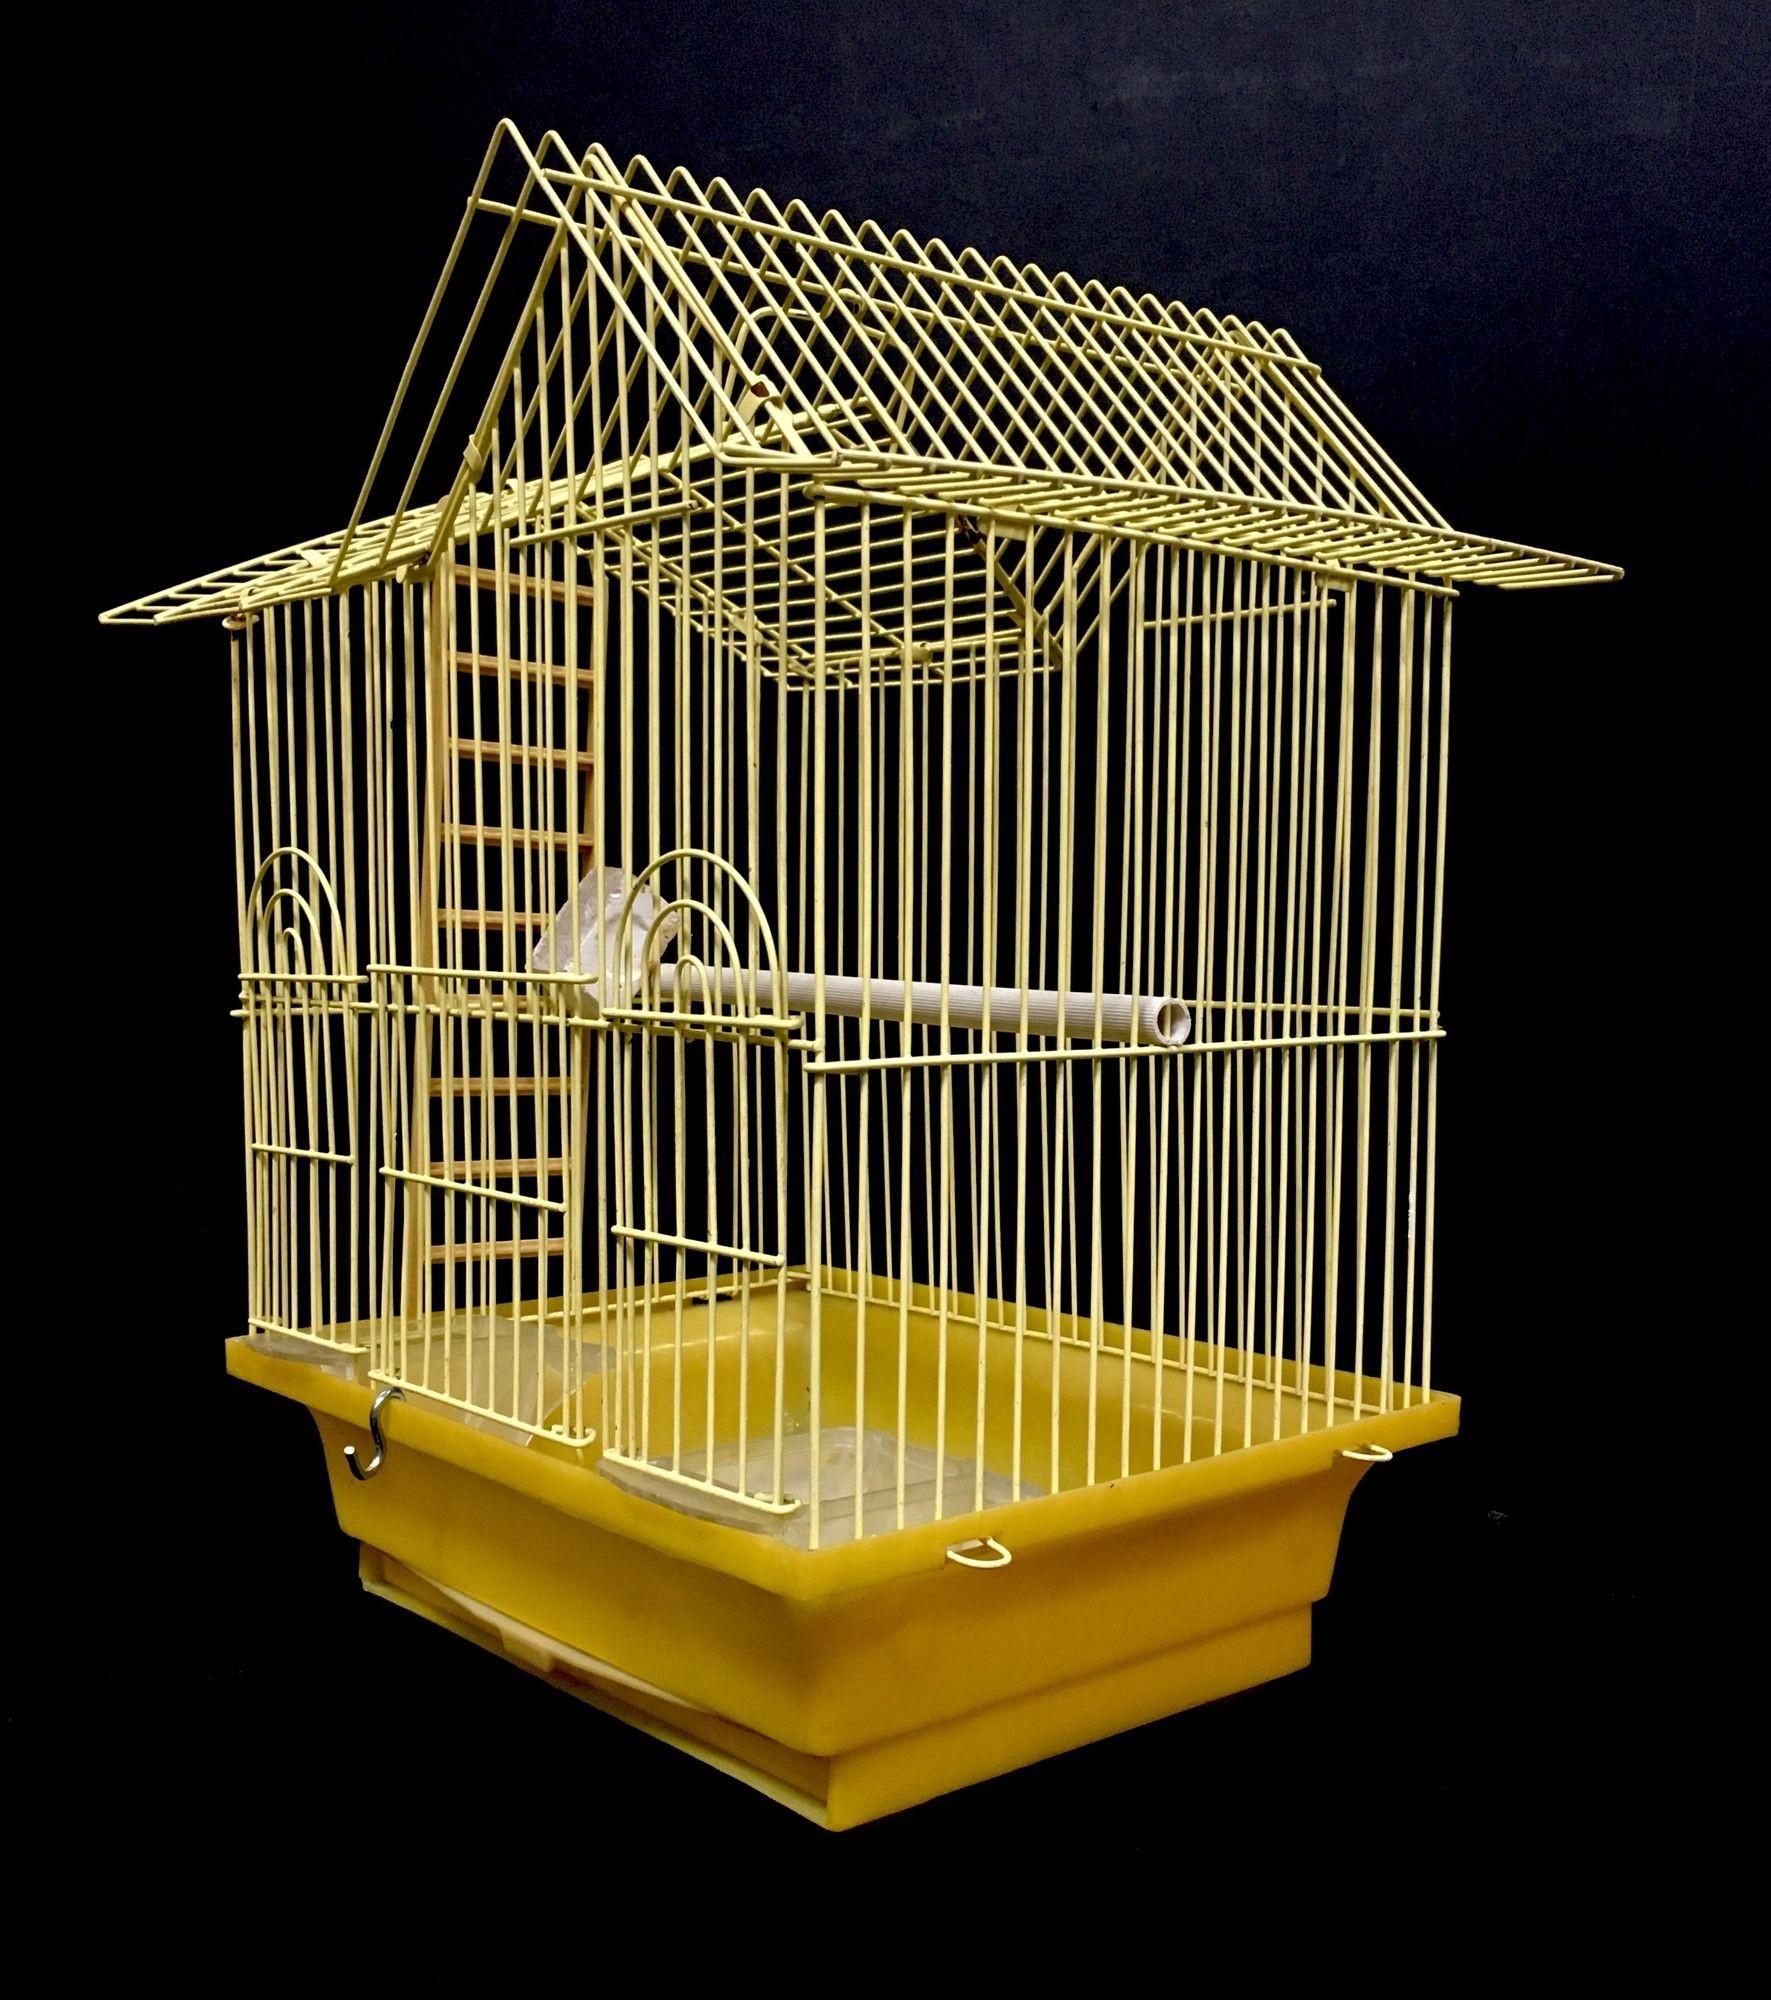 Vintage short wire house birdcage single roof in yellow with accessories. 
 
This wire birdcage comes with a plastic perch, one ladder, and 2 removable feeder trays, removable grille and pullout debris tray which makes it for an easy cleaning